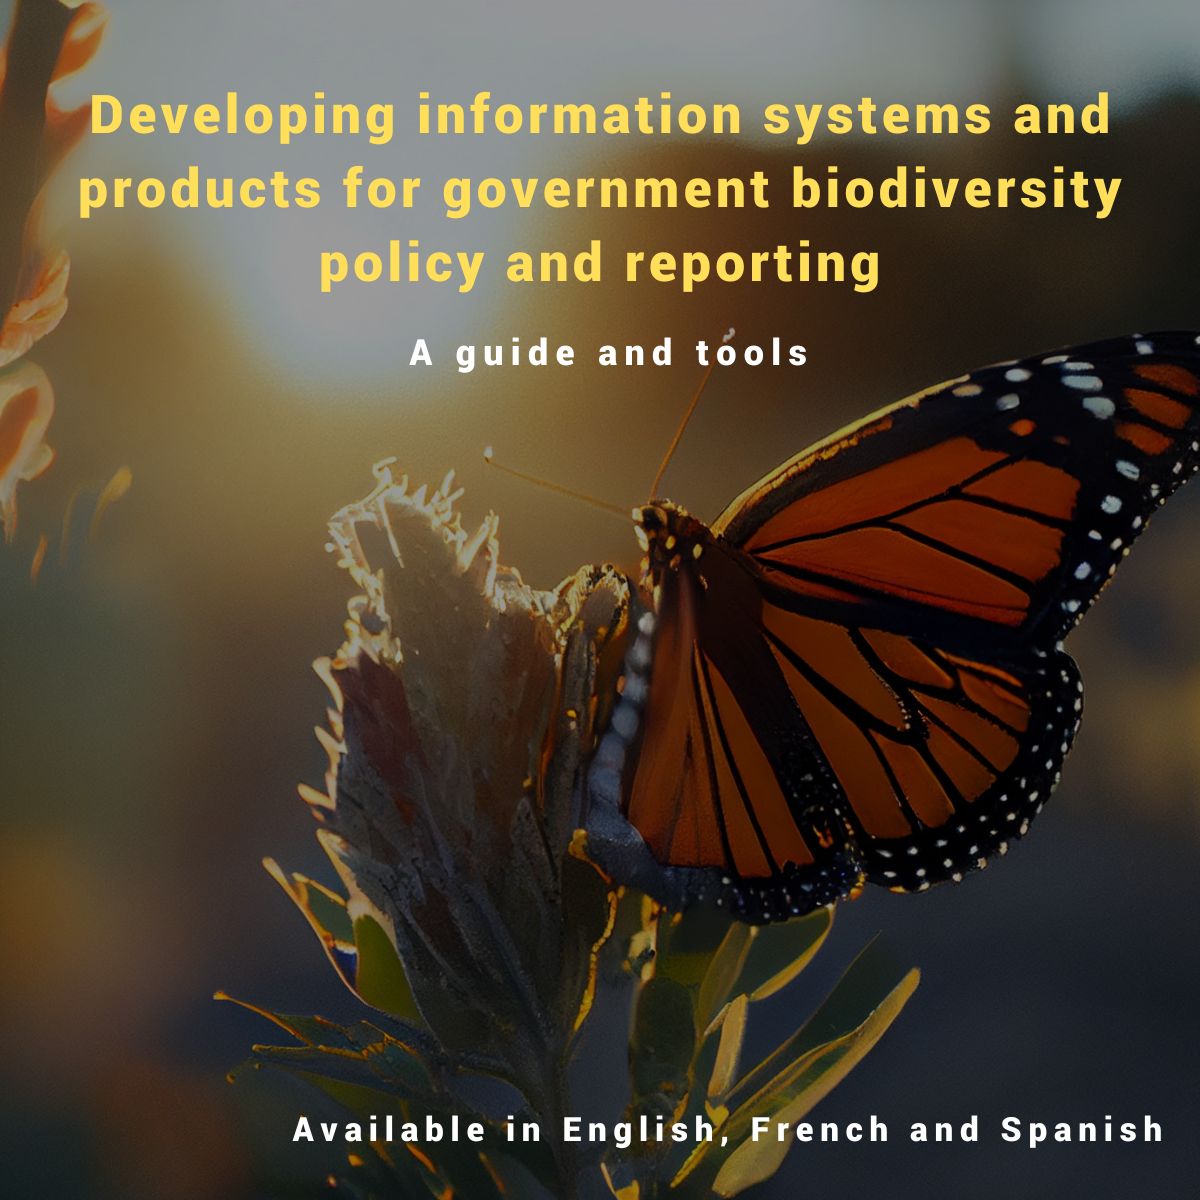 Government staff can develop systems that organize how biodiversity information is produced and made available for effective decision-making with UNEP-WCMC’s latest suite of information systems guide and tools: eu1.hubs.ly/H094qCR0 🛠️🌐🌿